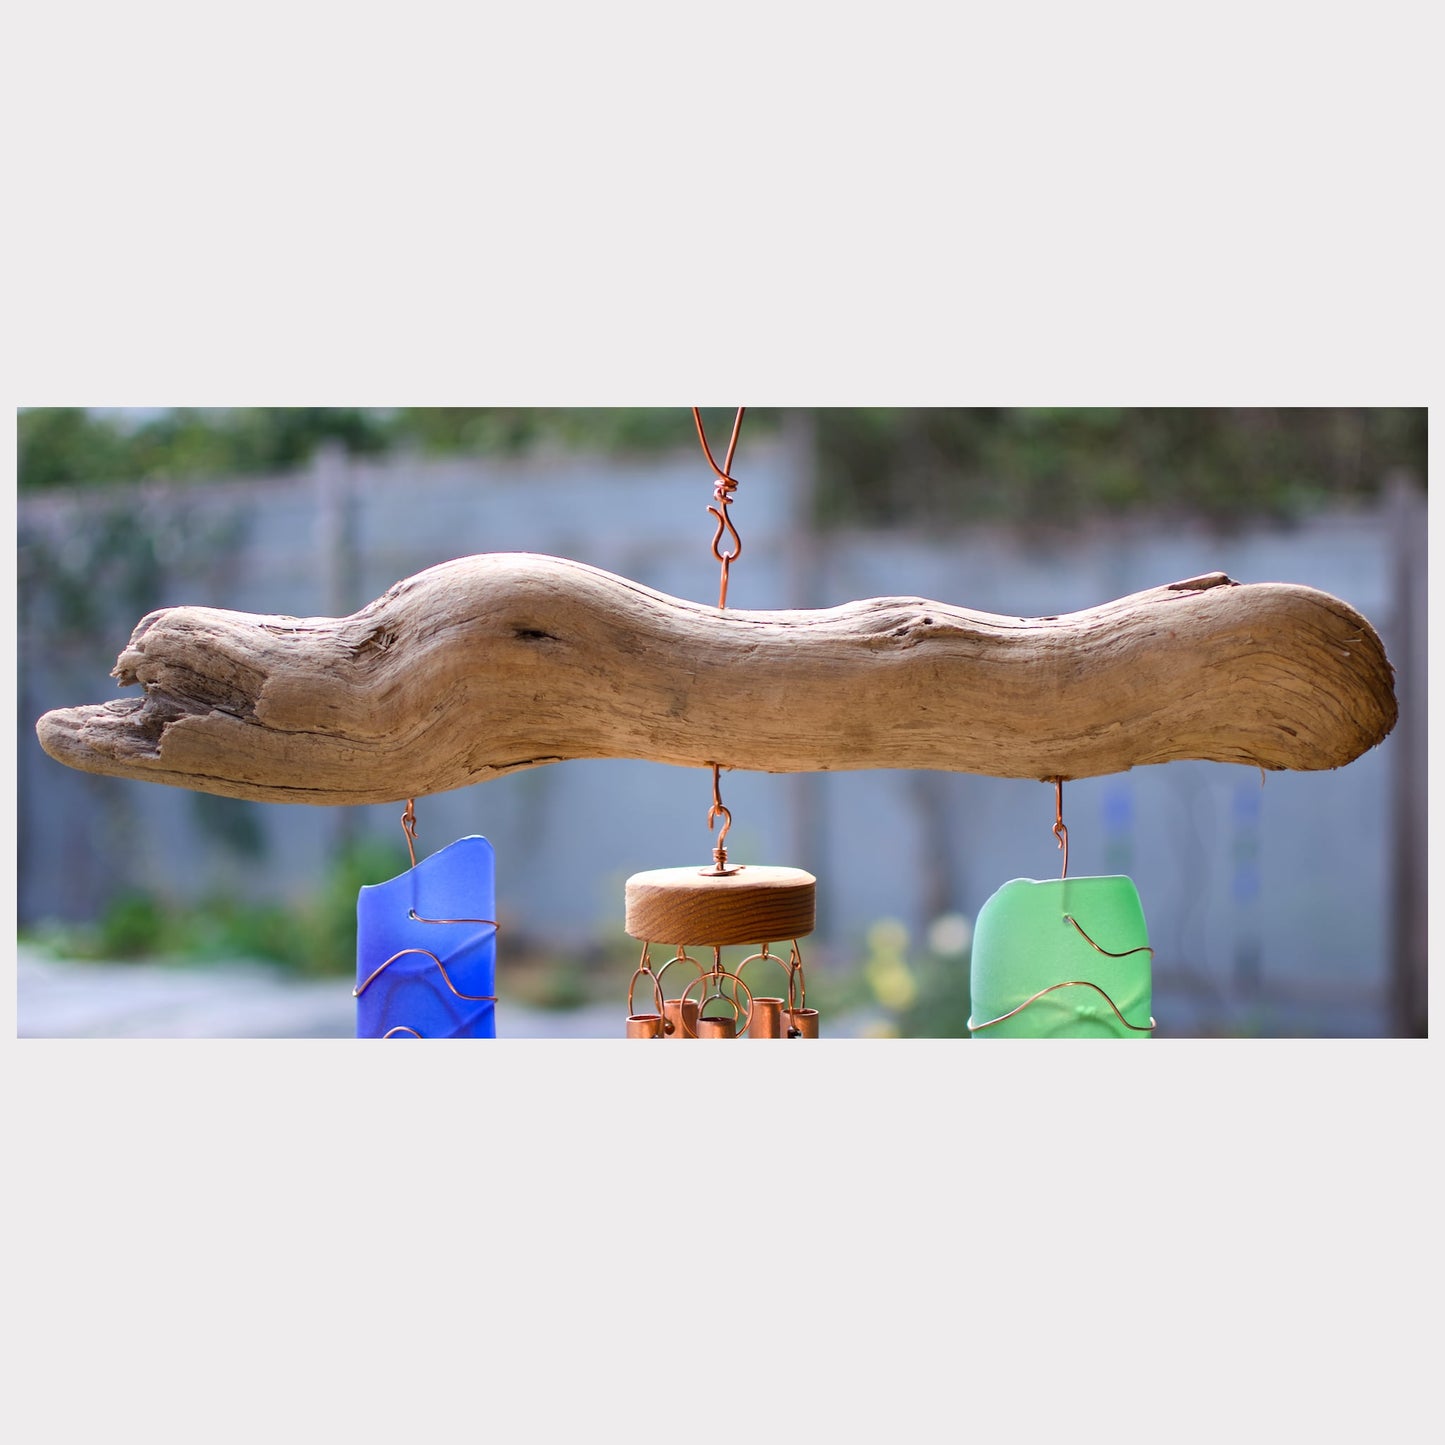 detail, driftwood wind chime